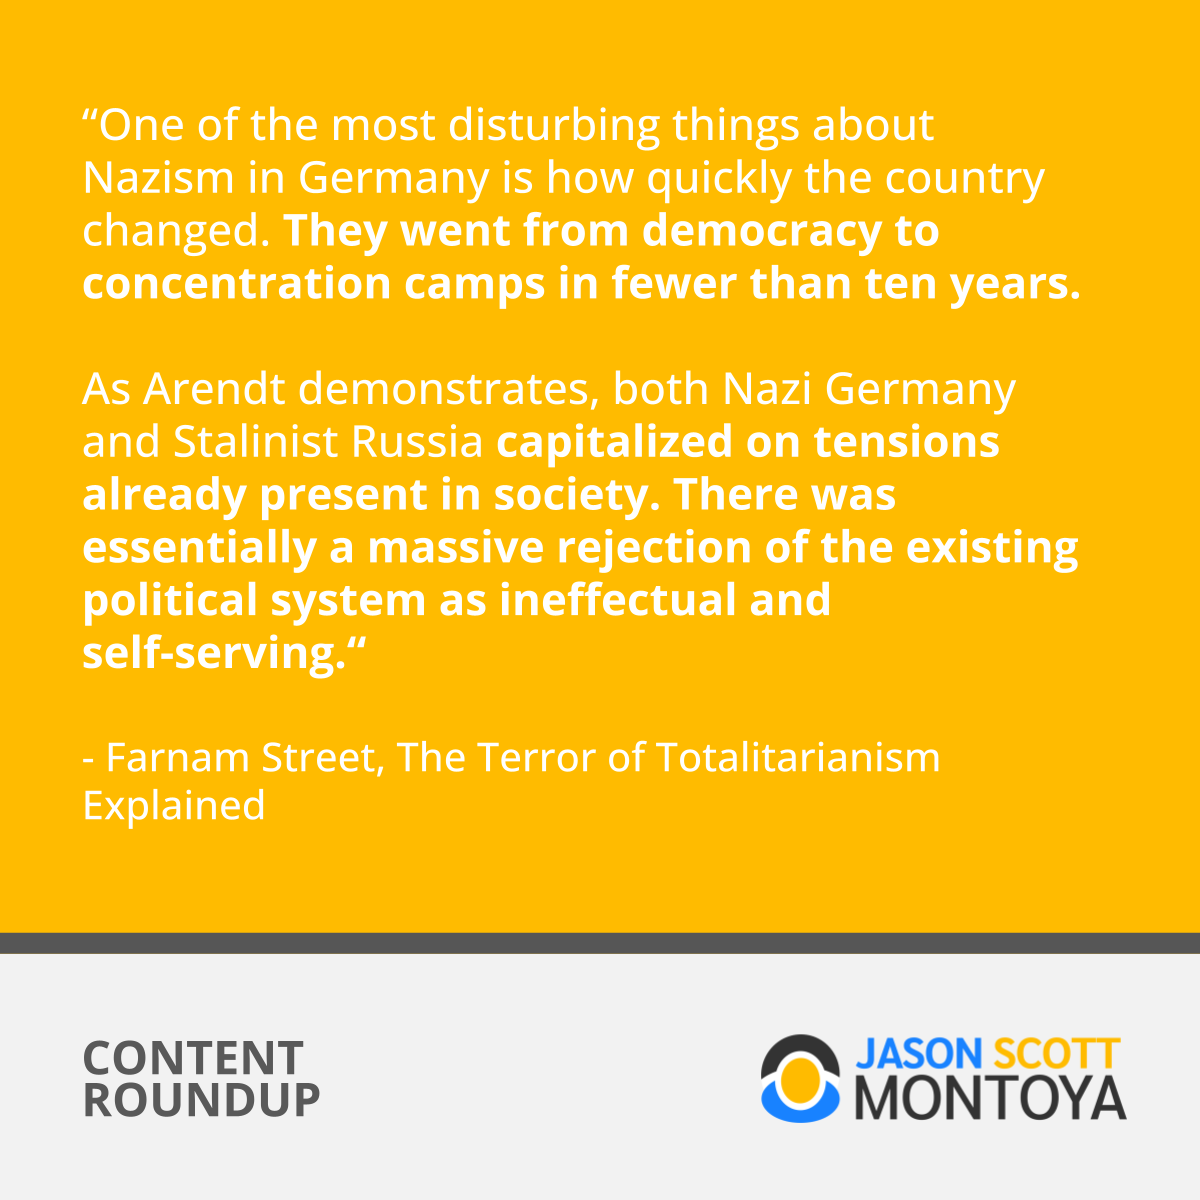 “One of the most disturbing things about Nazism in Germany is how quickly the country changed. They went from democracy to concentration camps in fewer than ten years.   As Arendt demonstrates, both Nazi Germany and Stalinist Russia capitalized on tensions already present in society. There was essentially a massive rejection of the existing political system as ineffectual and self-serving.“  - Farnam Street, The Terror of Totalitarianism Explained